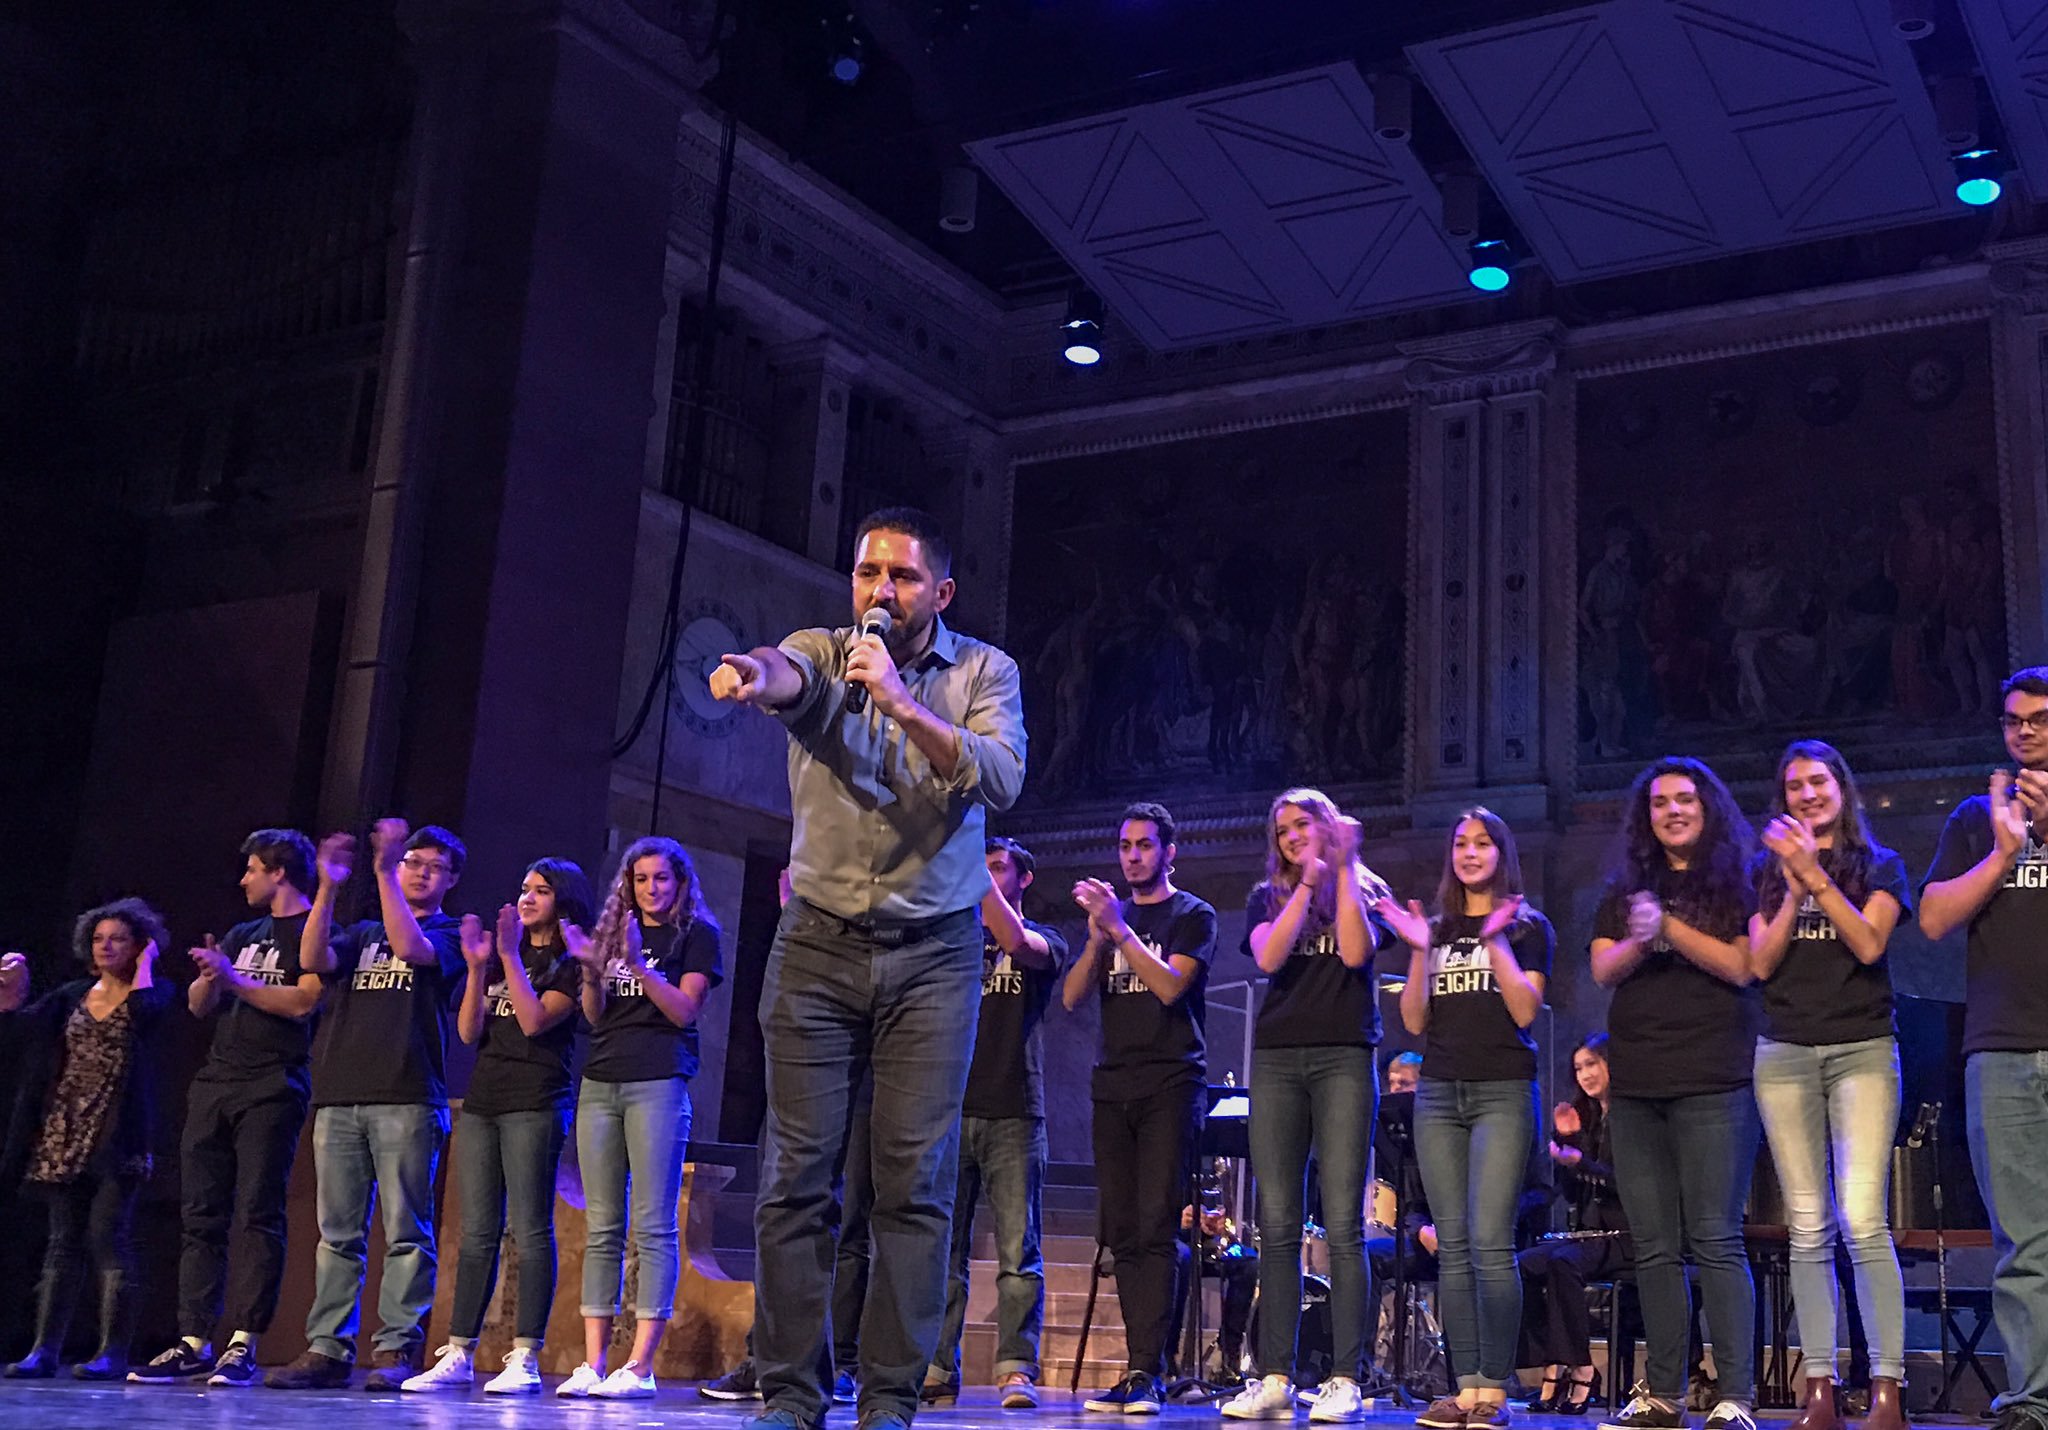 @pochojoe and many talented Tigers blew up the stage tonight at the #adelanteprinceton performers showcase. #princetonarts #PrincetonU https://t.co/tEe1EbnY44